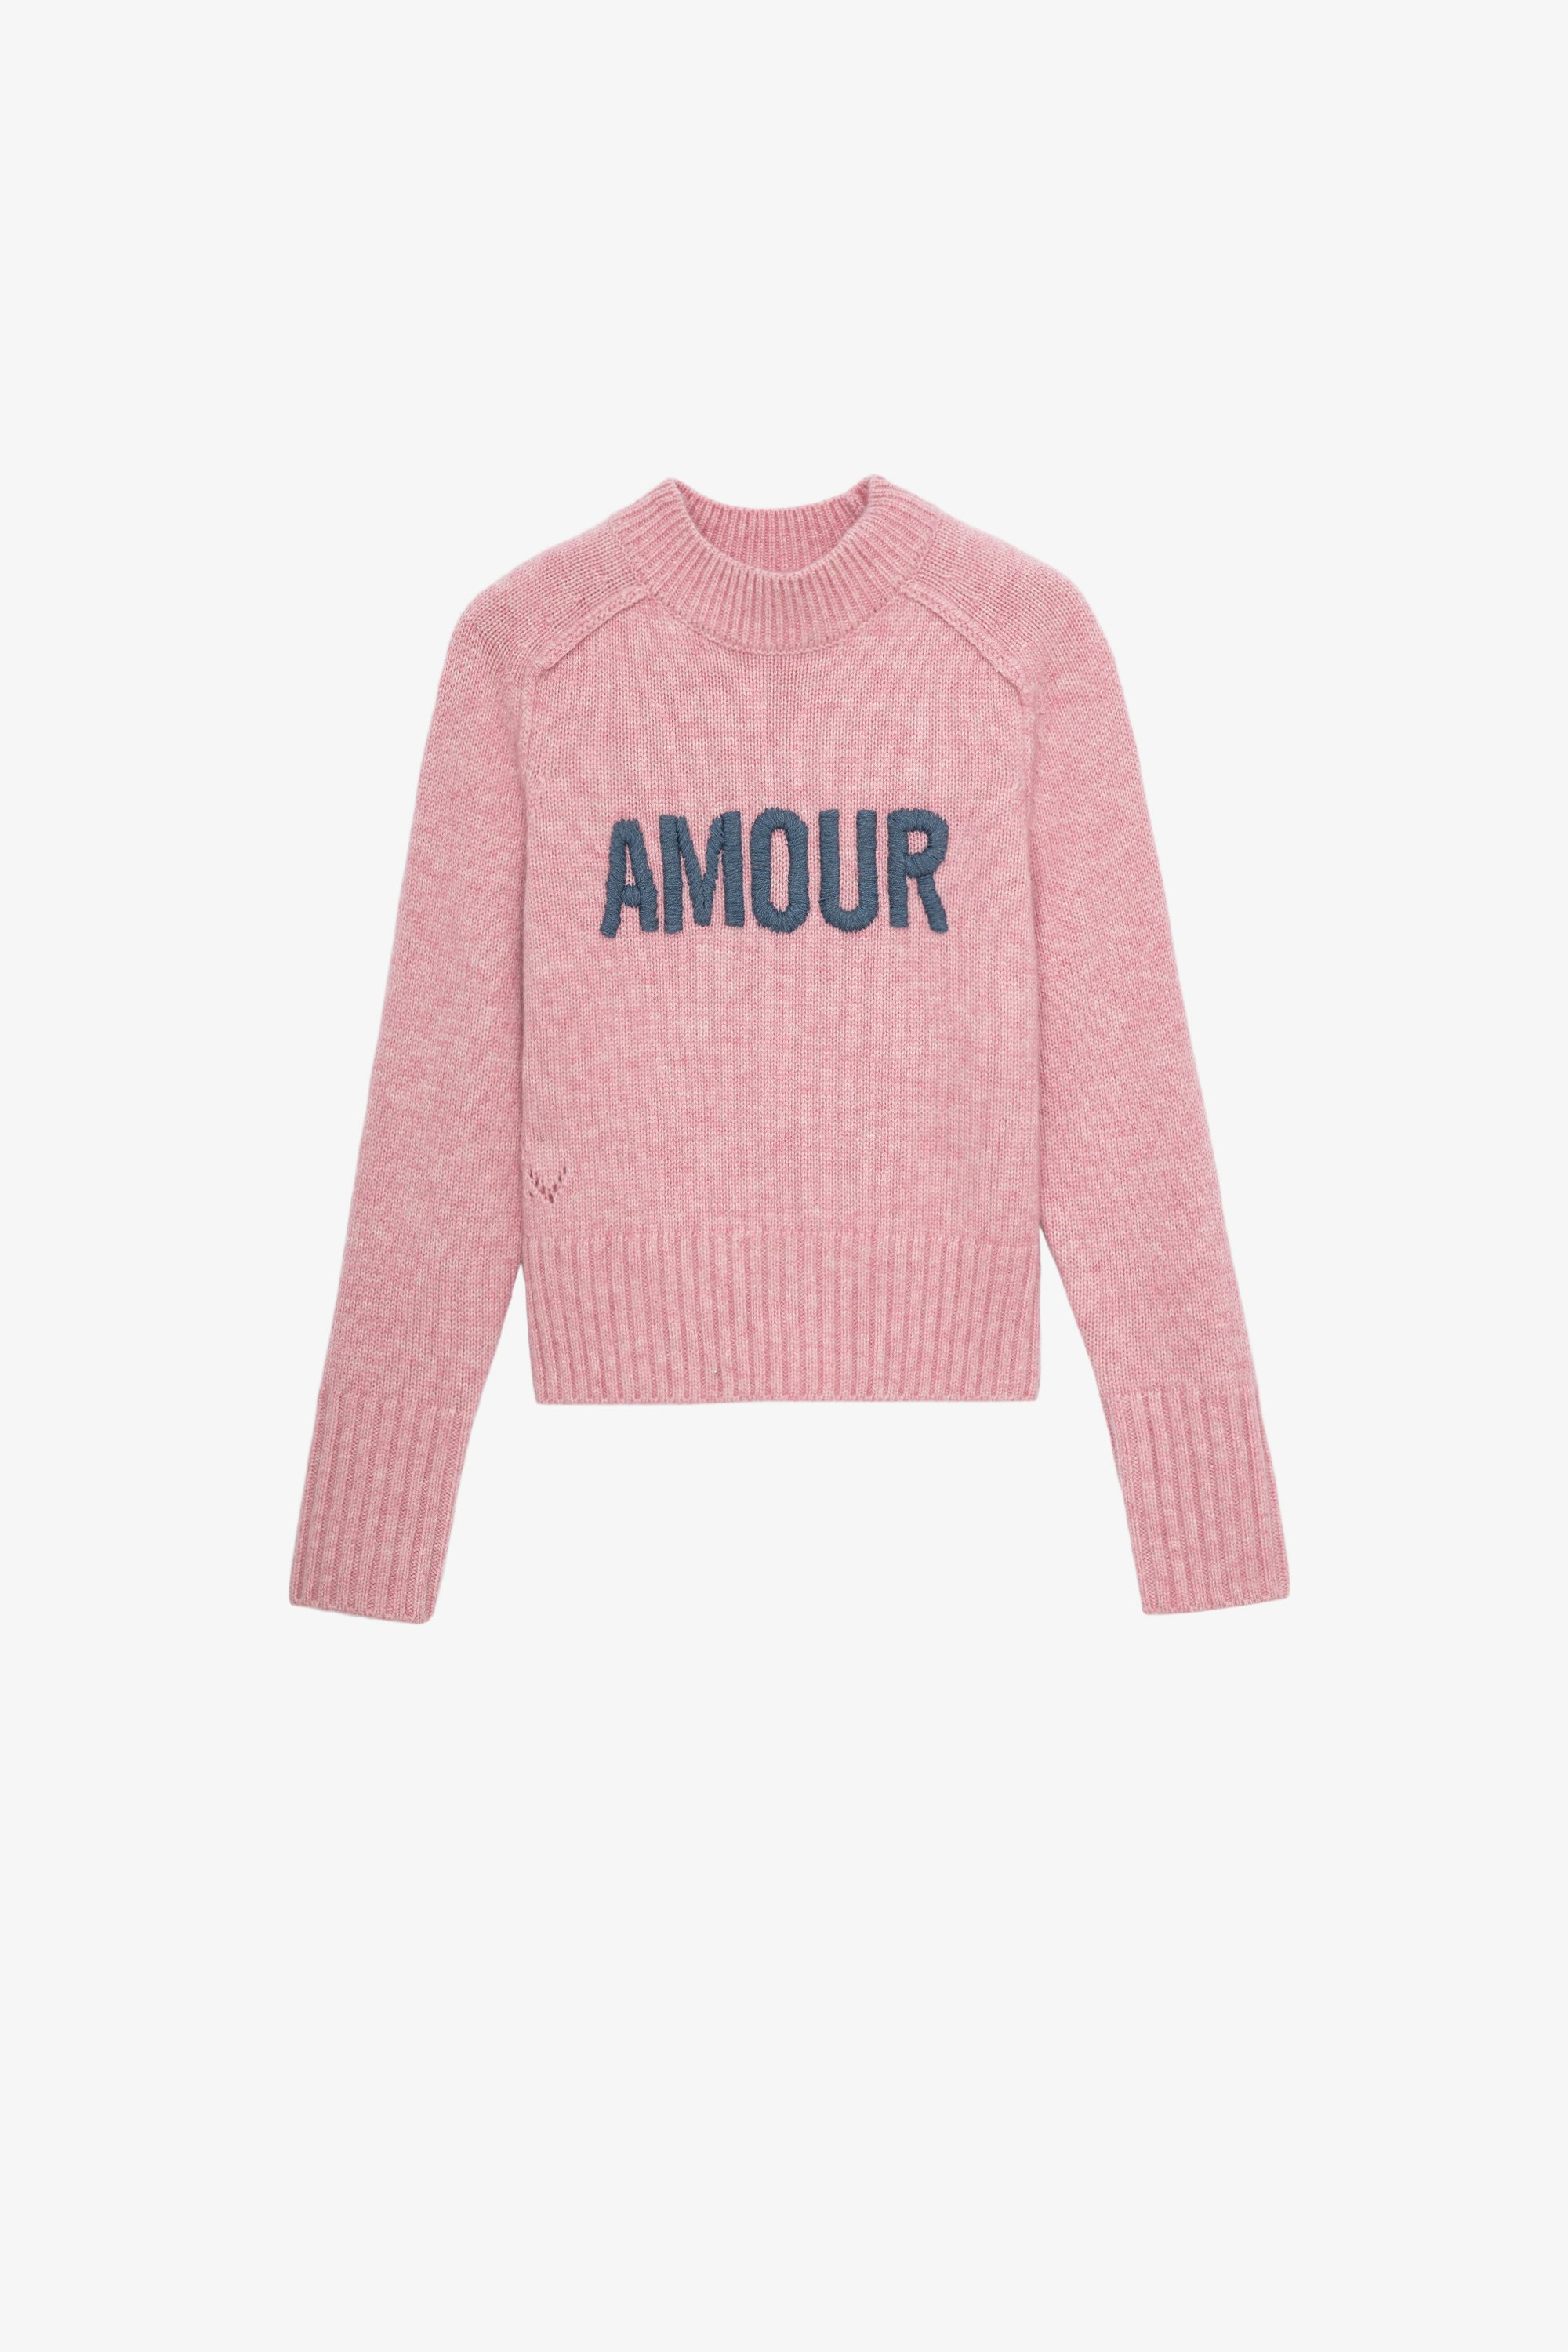 Milan Children’s ニット Children’s pink long-sleeve knitted jumper with contrasting “Love” message 